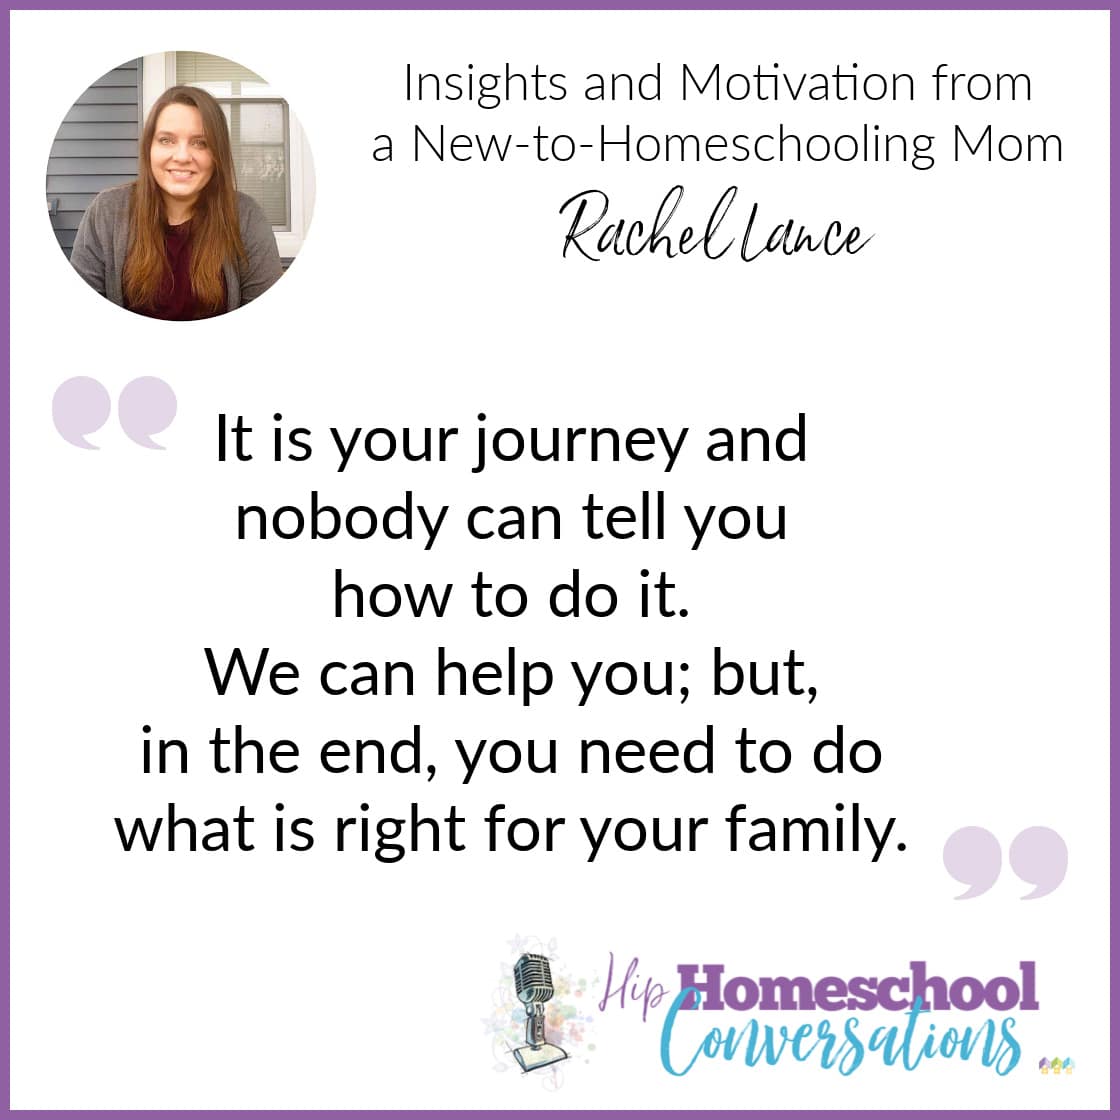 Join us as we interview Rachel Lance, a mom of two who was thrown into homeschooling during a pandemic while working full time and obtaining a graduate degree. #homeschool #hiphomeschoolmoms